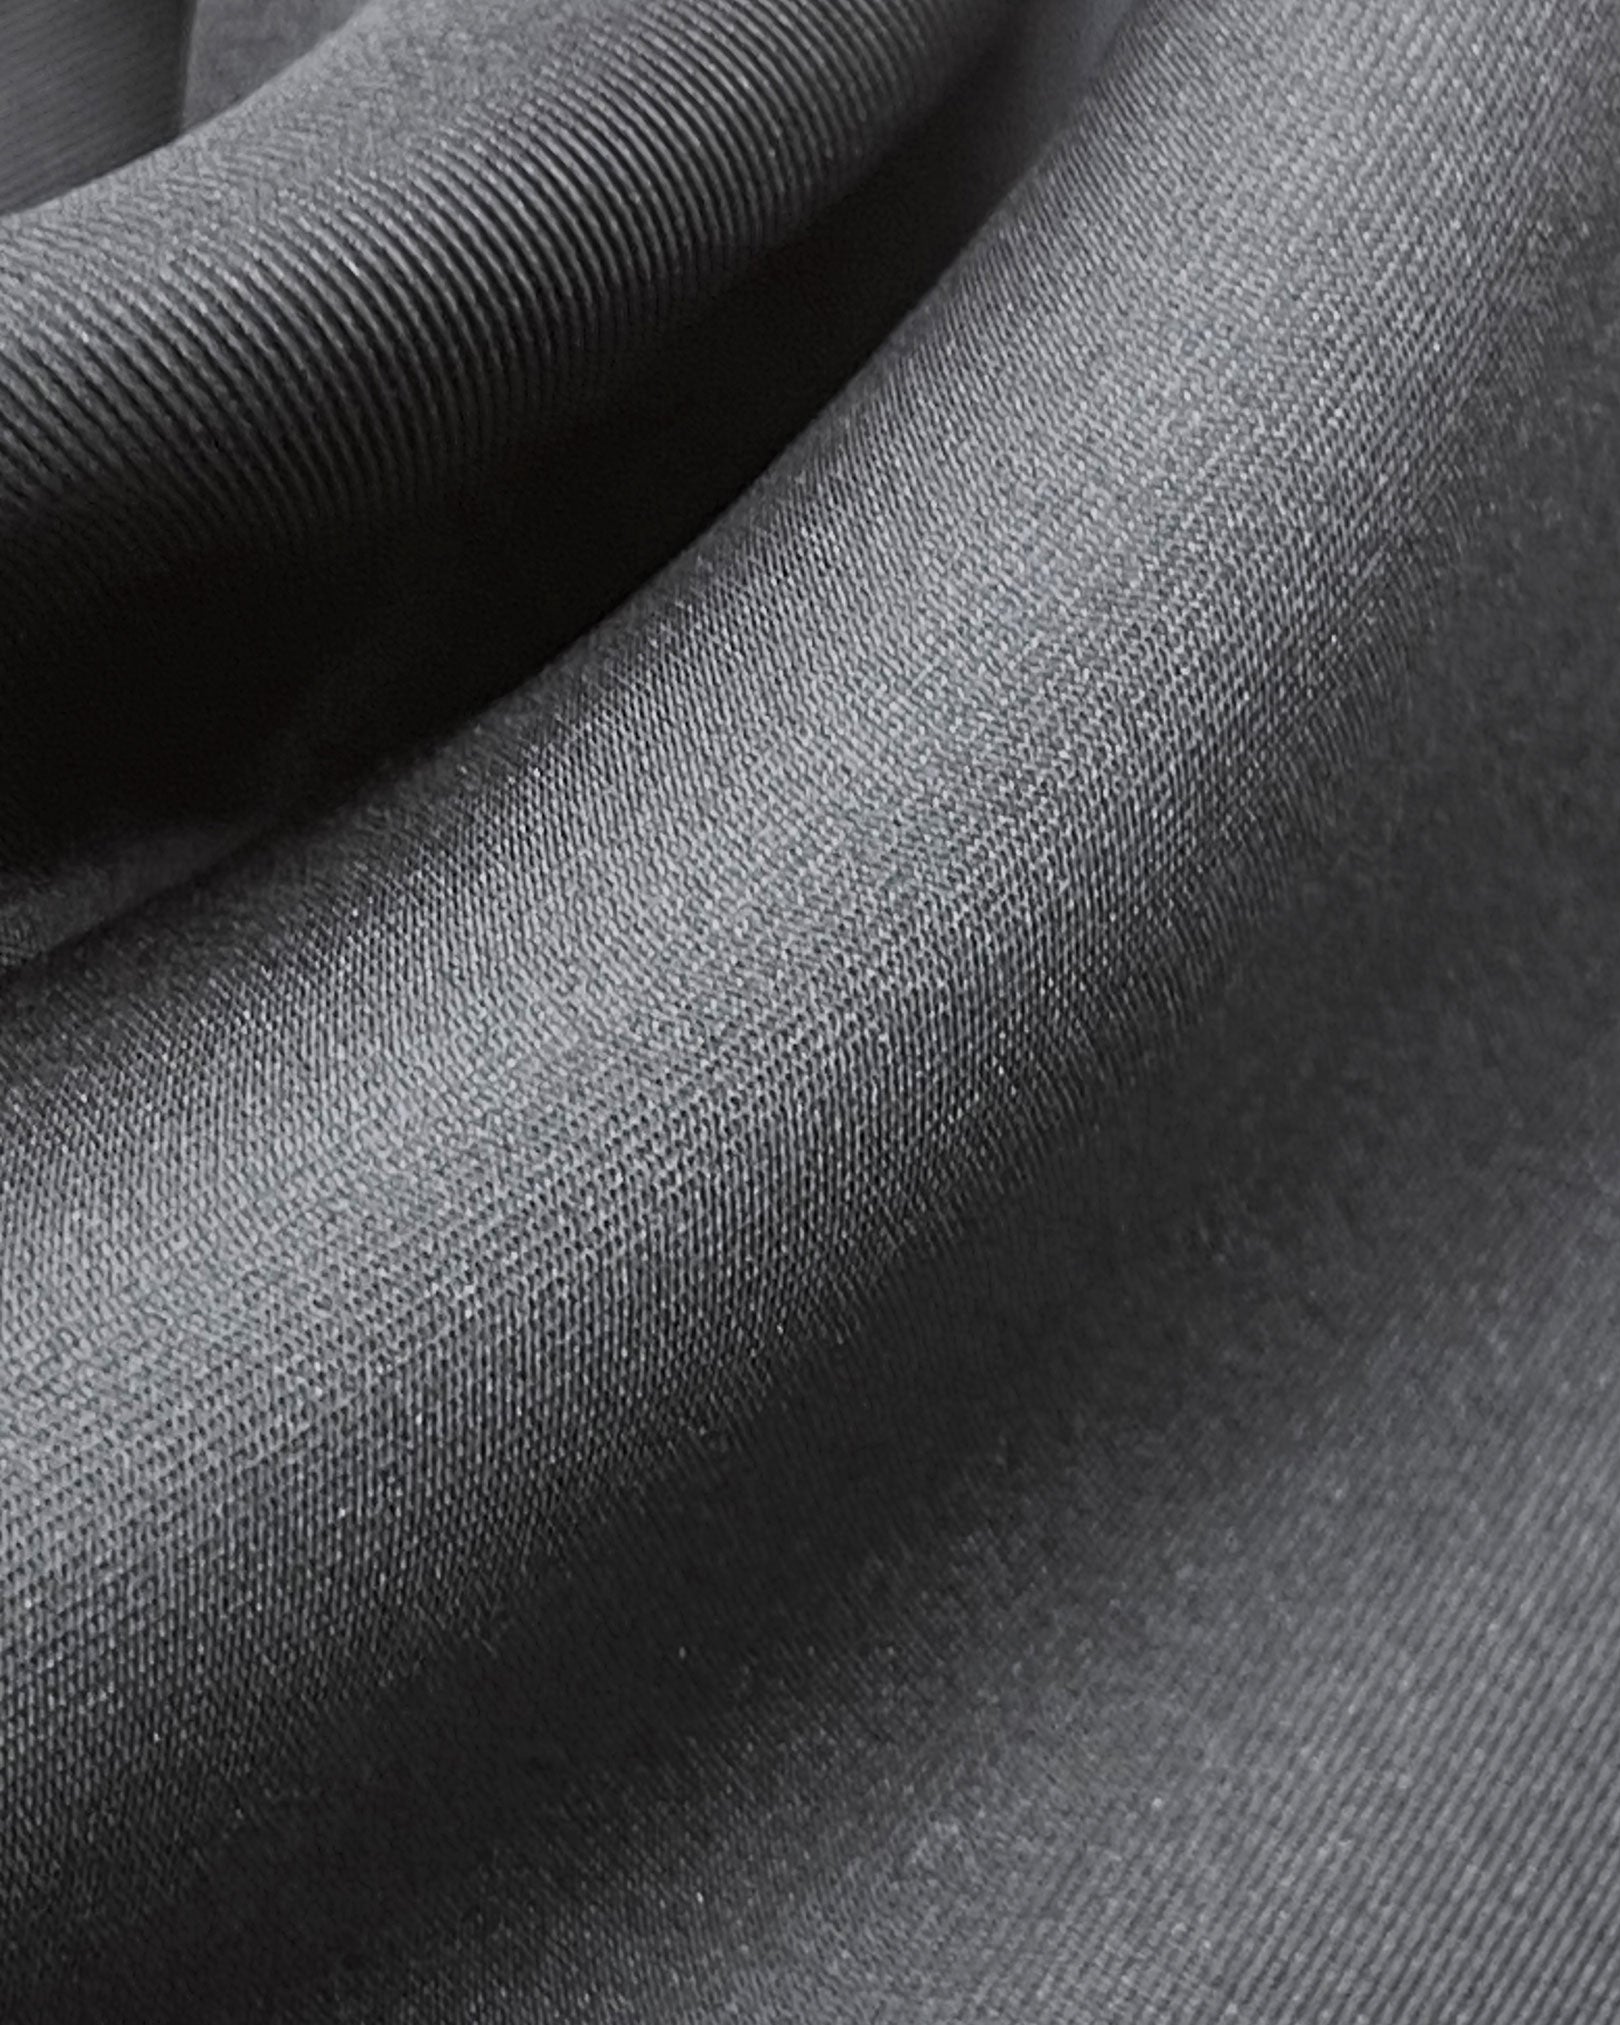 Ruffled close-up view of the 'Air Black' silk aviator scarf, presenting a closer view of the subtle lustre of the black material.